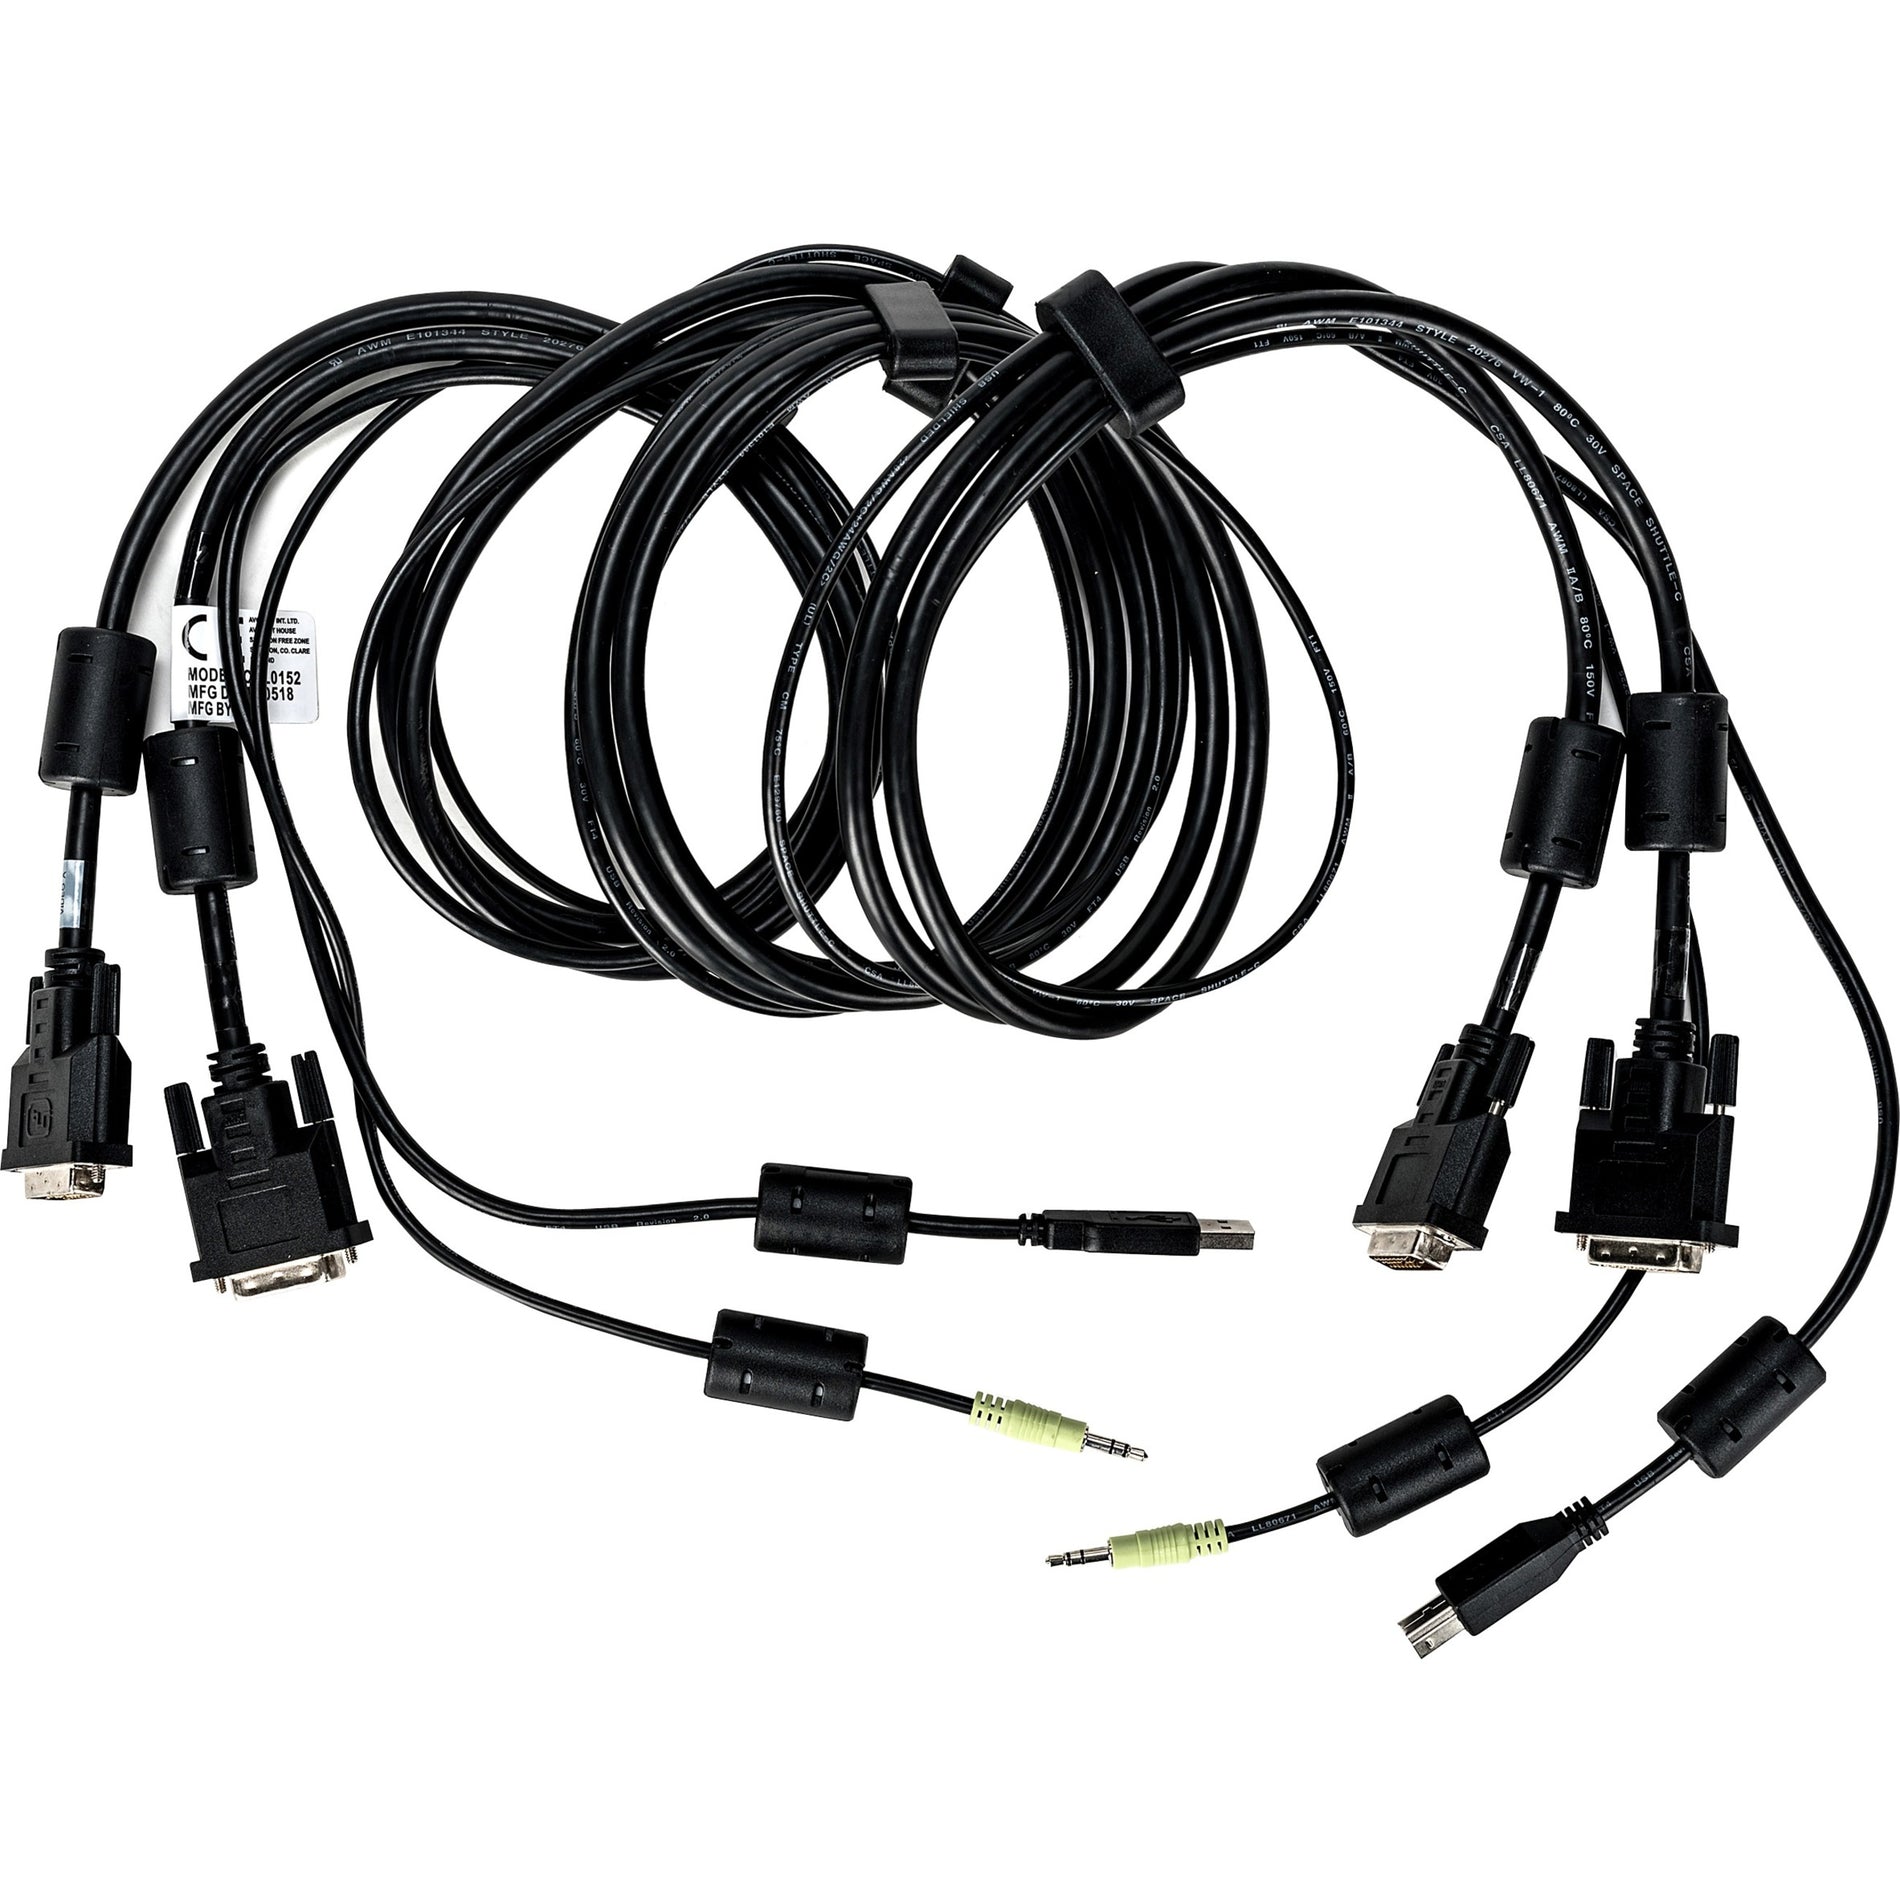 VERTIV CBL0152 KVM Cable, 6 ft. USB Keyboard and Mouse, DVI-D and Audio Cable